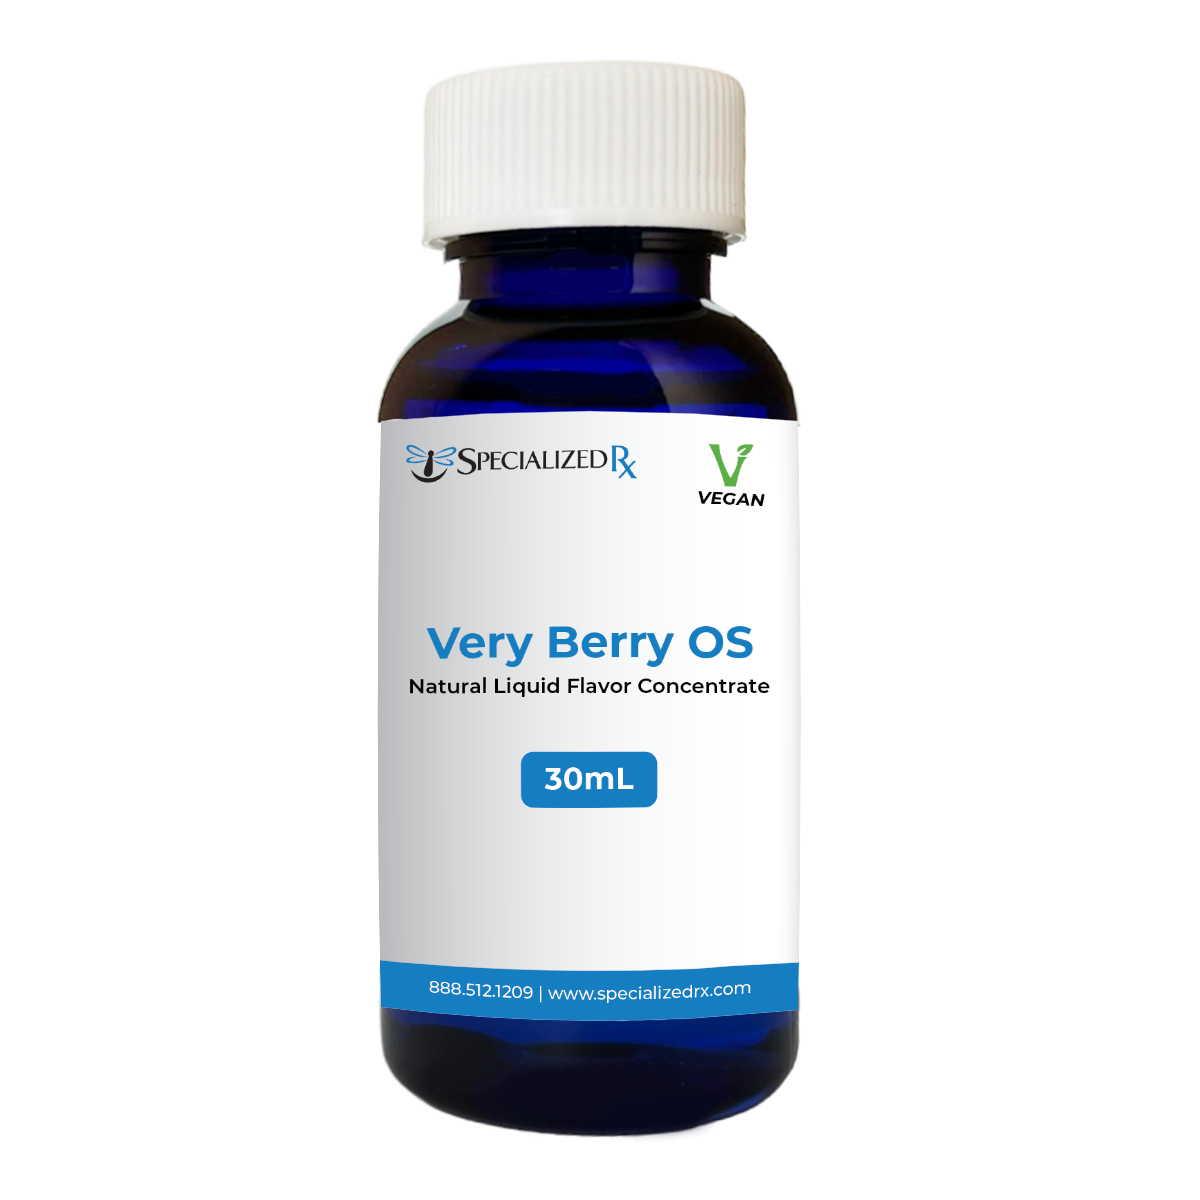 Very Berry OS Natural Liquid Flavor Concentrate